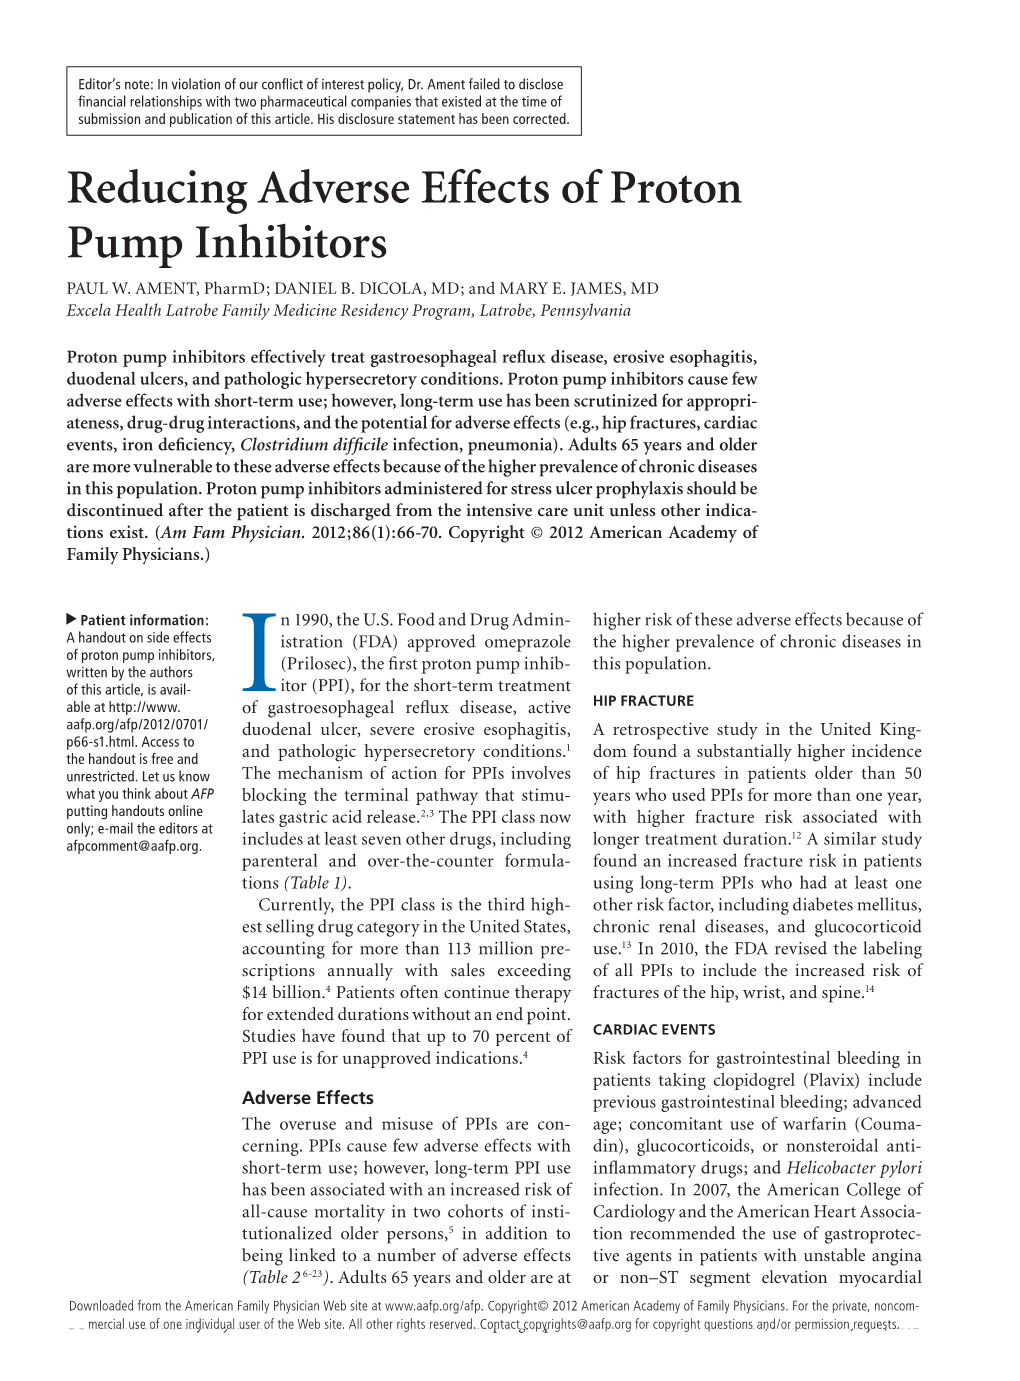 Reducing Adverse Effects of Proton Pump Inhibitors PAUL W